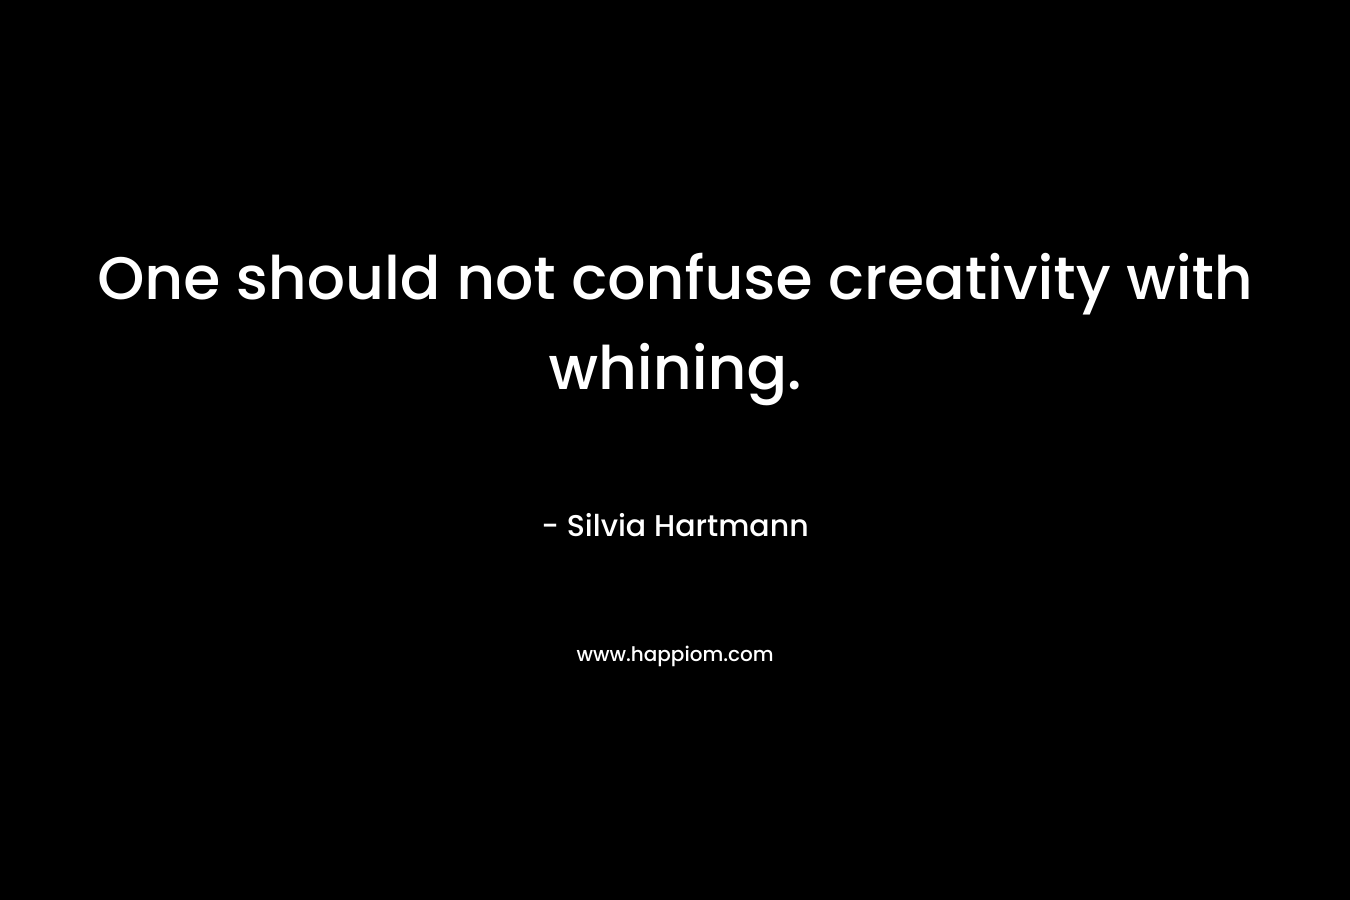 One should not confuse creativity with whining.